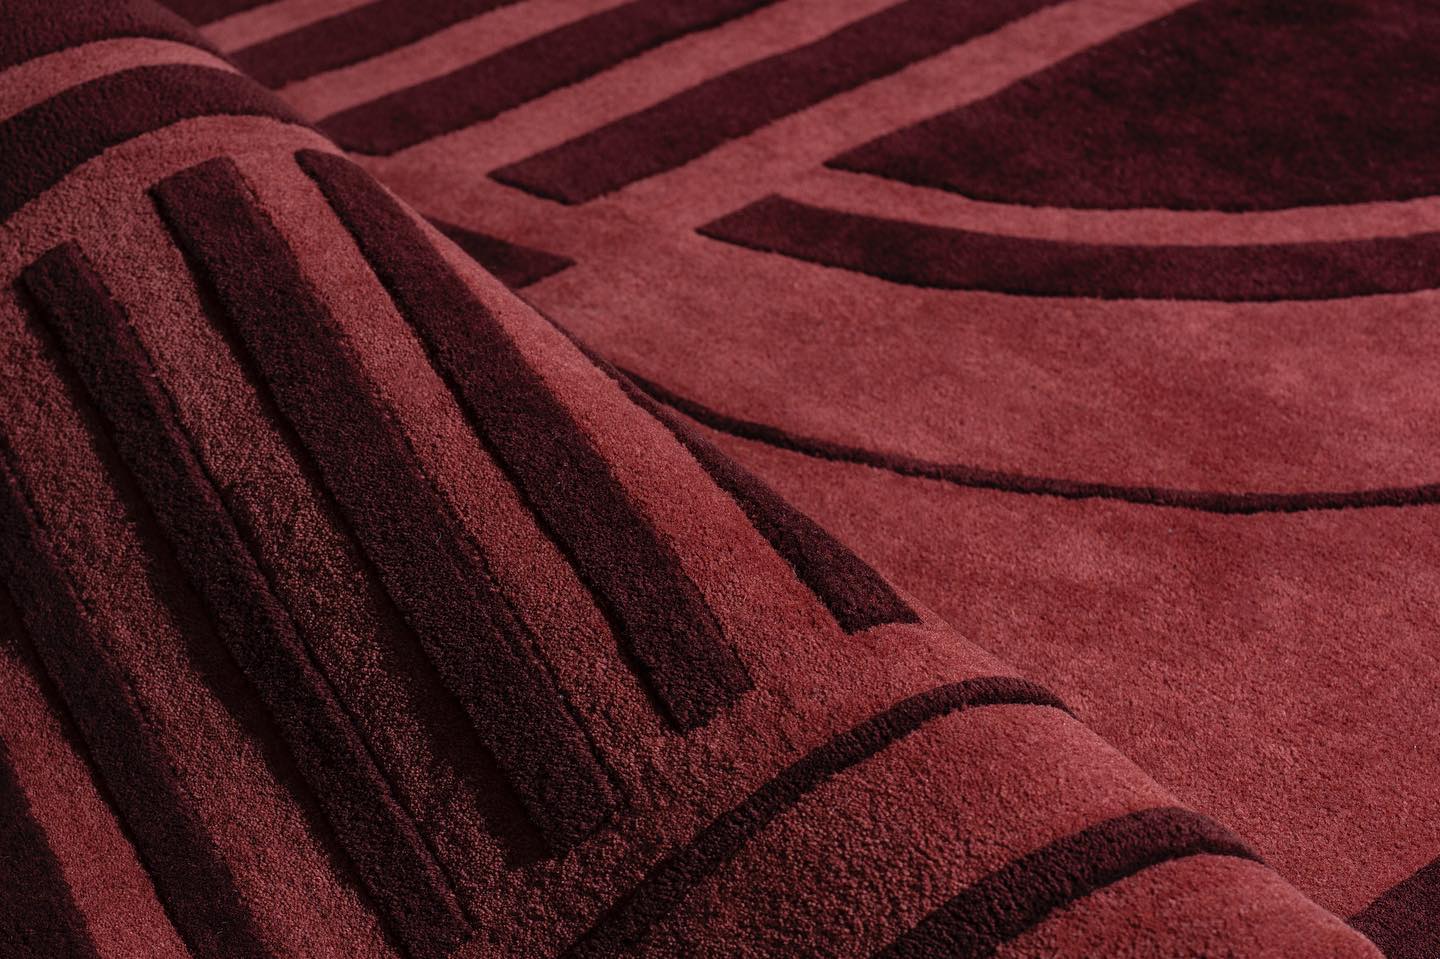 The Indian Rug-showcasing impeccable Indian craftsmanship.